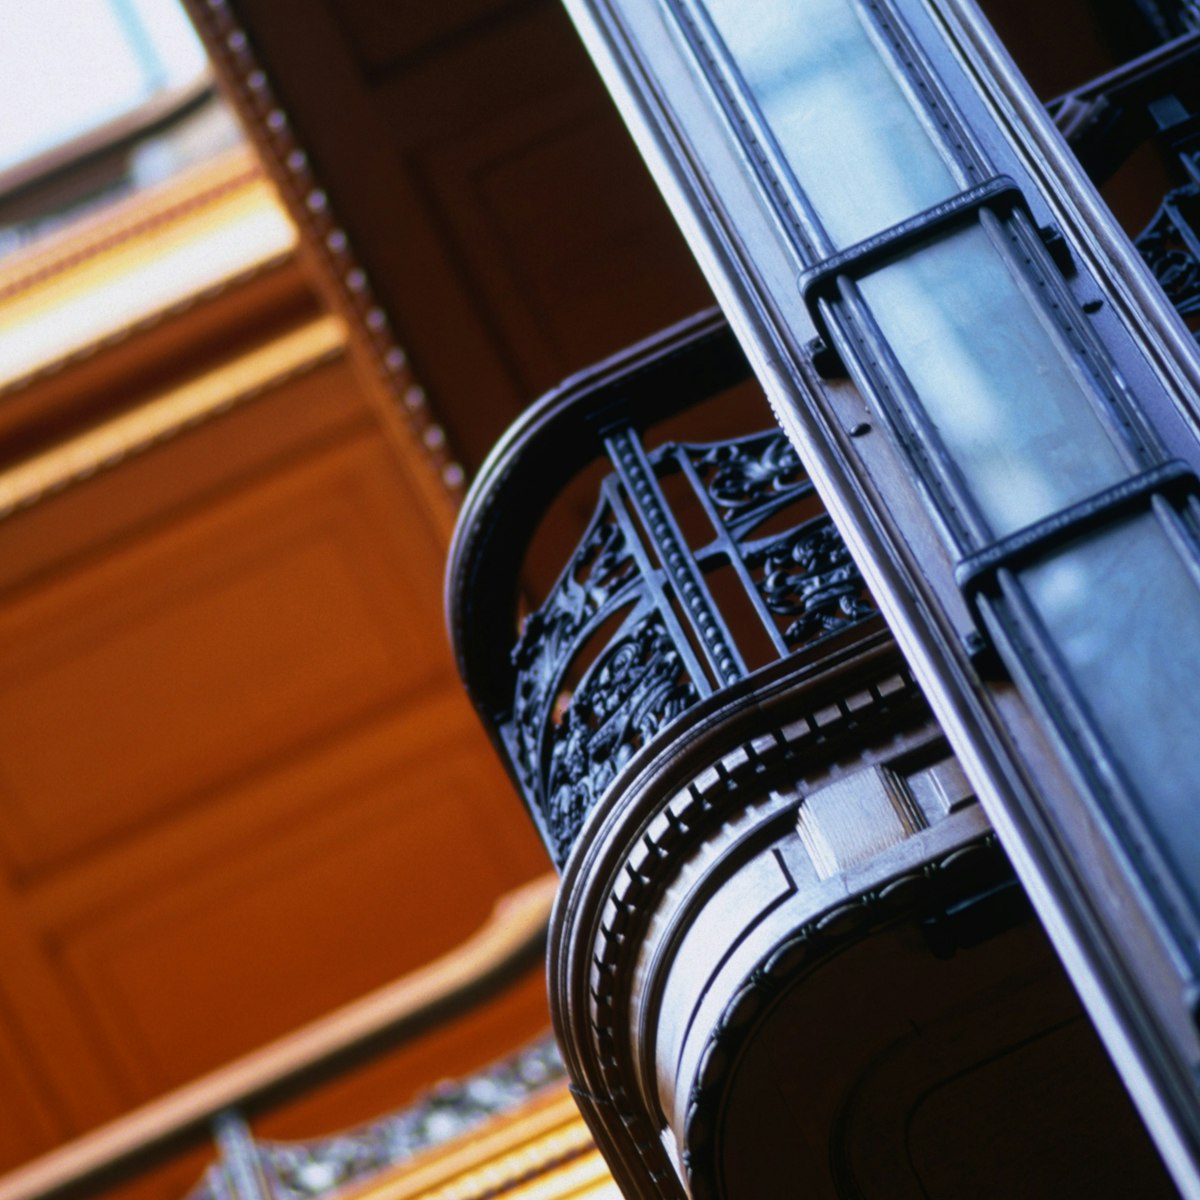 The 19th century Bradbury Building in downtown Los Angeles. The Bradbury was featured in the movie 'Blade Runner'.